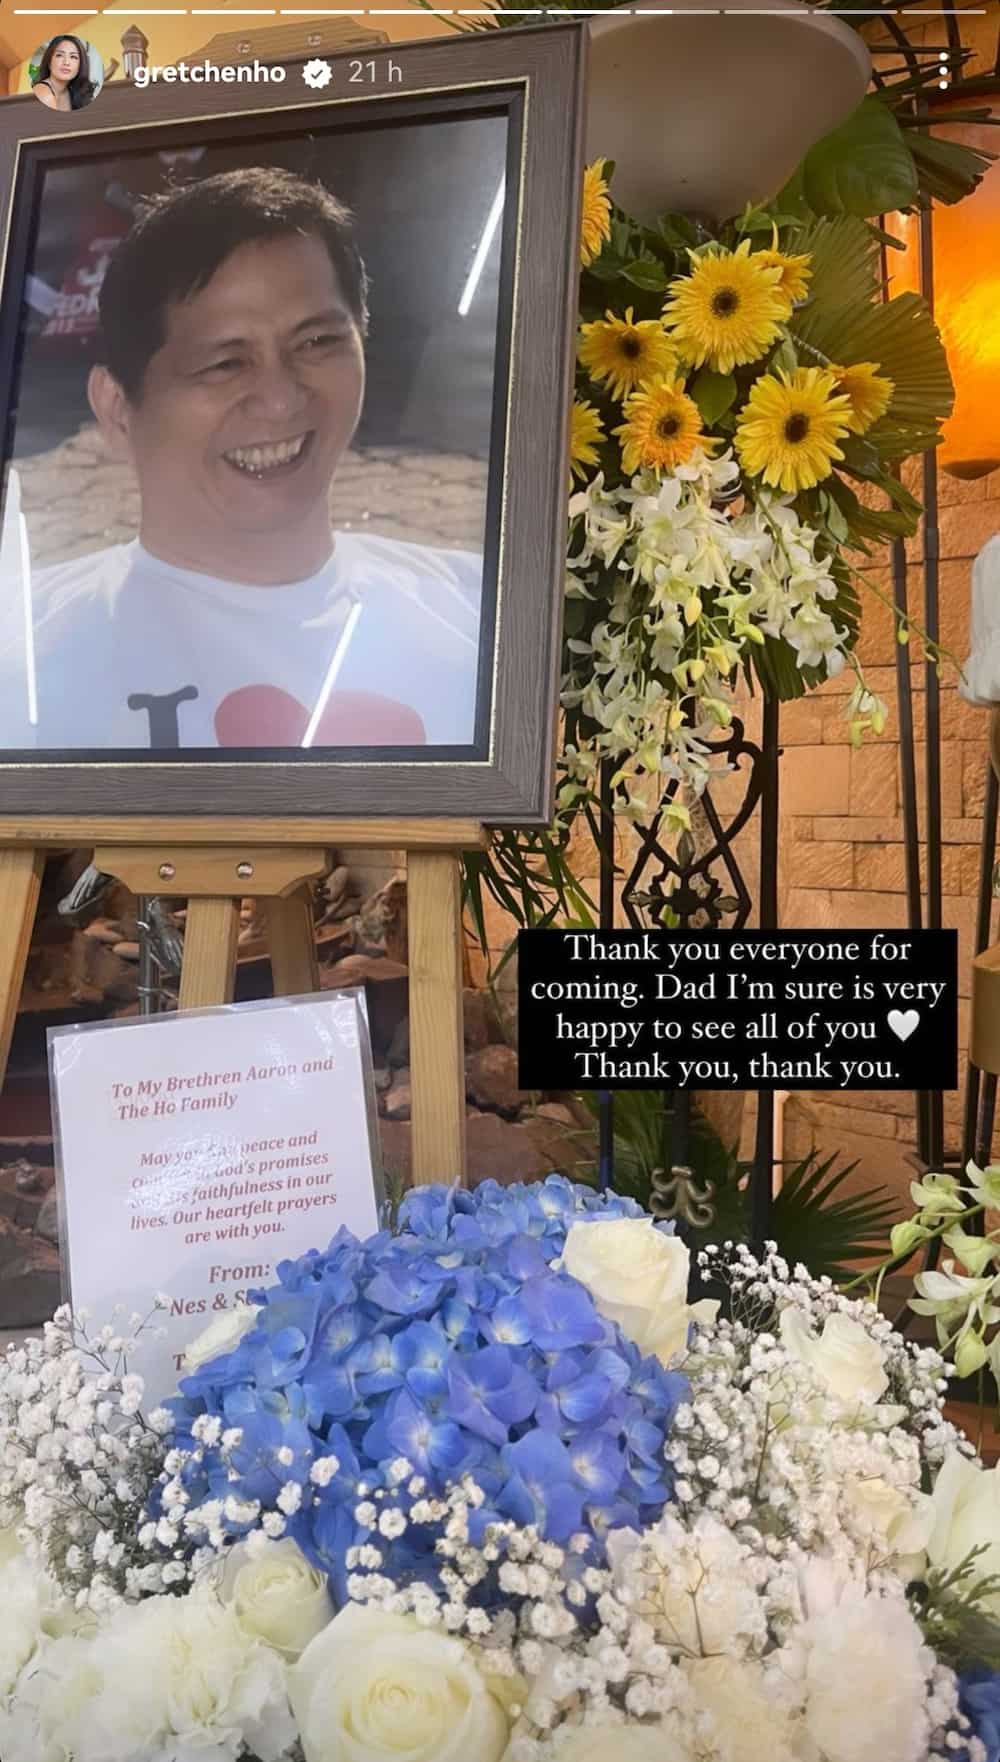 Gretchen Ho mourns over death of her father: “Rest easy”